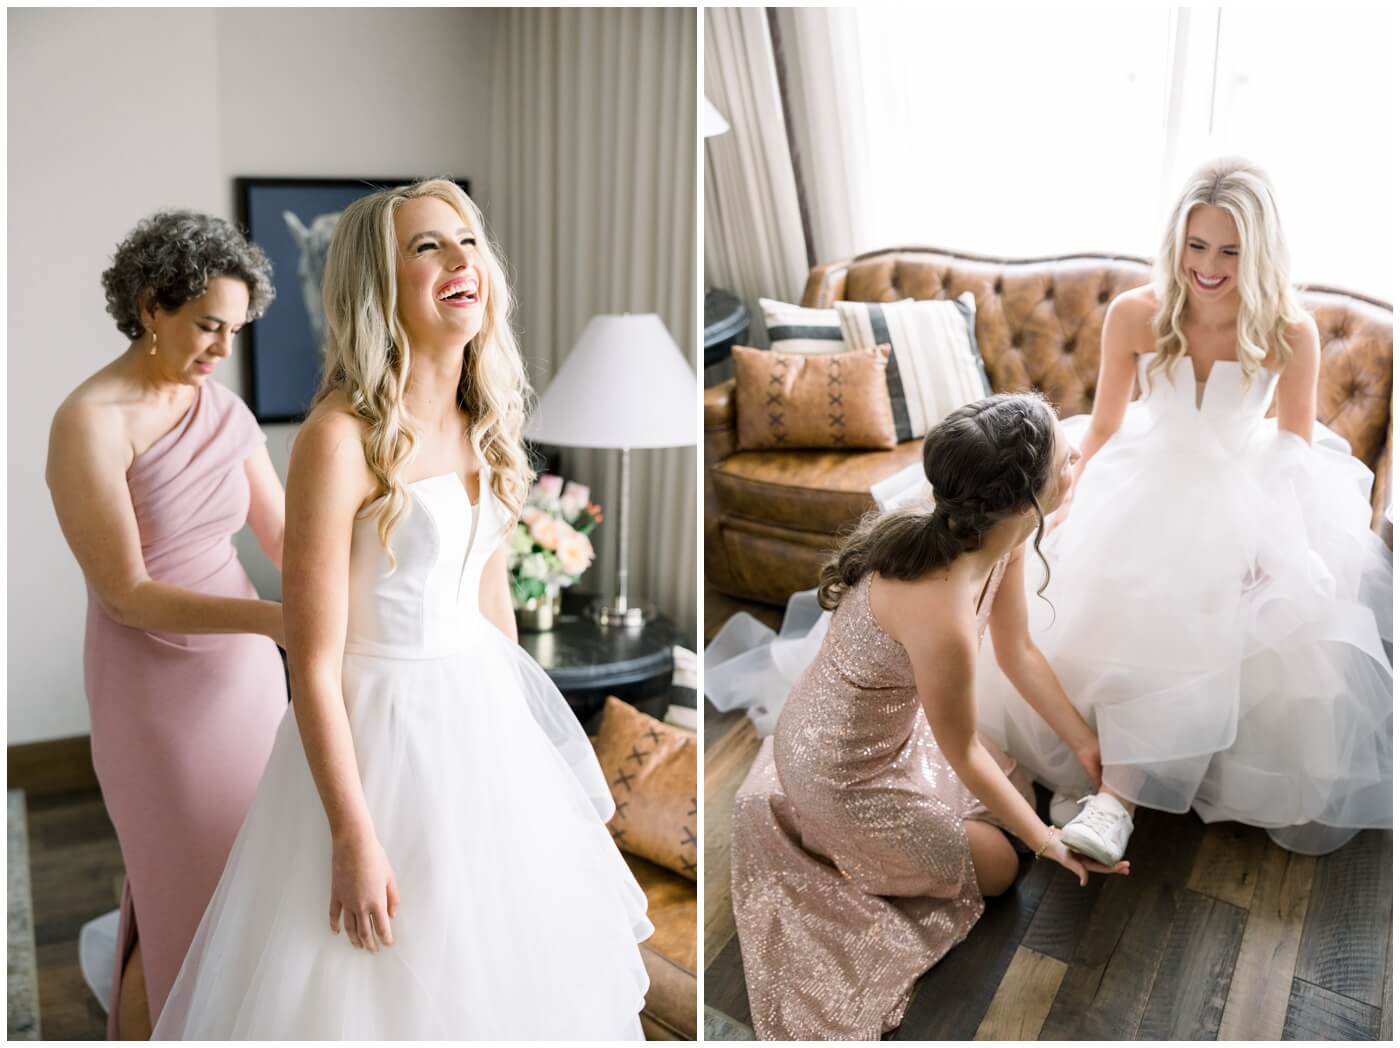 Mom helps daughter into her wedding dress at Hotel Drover